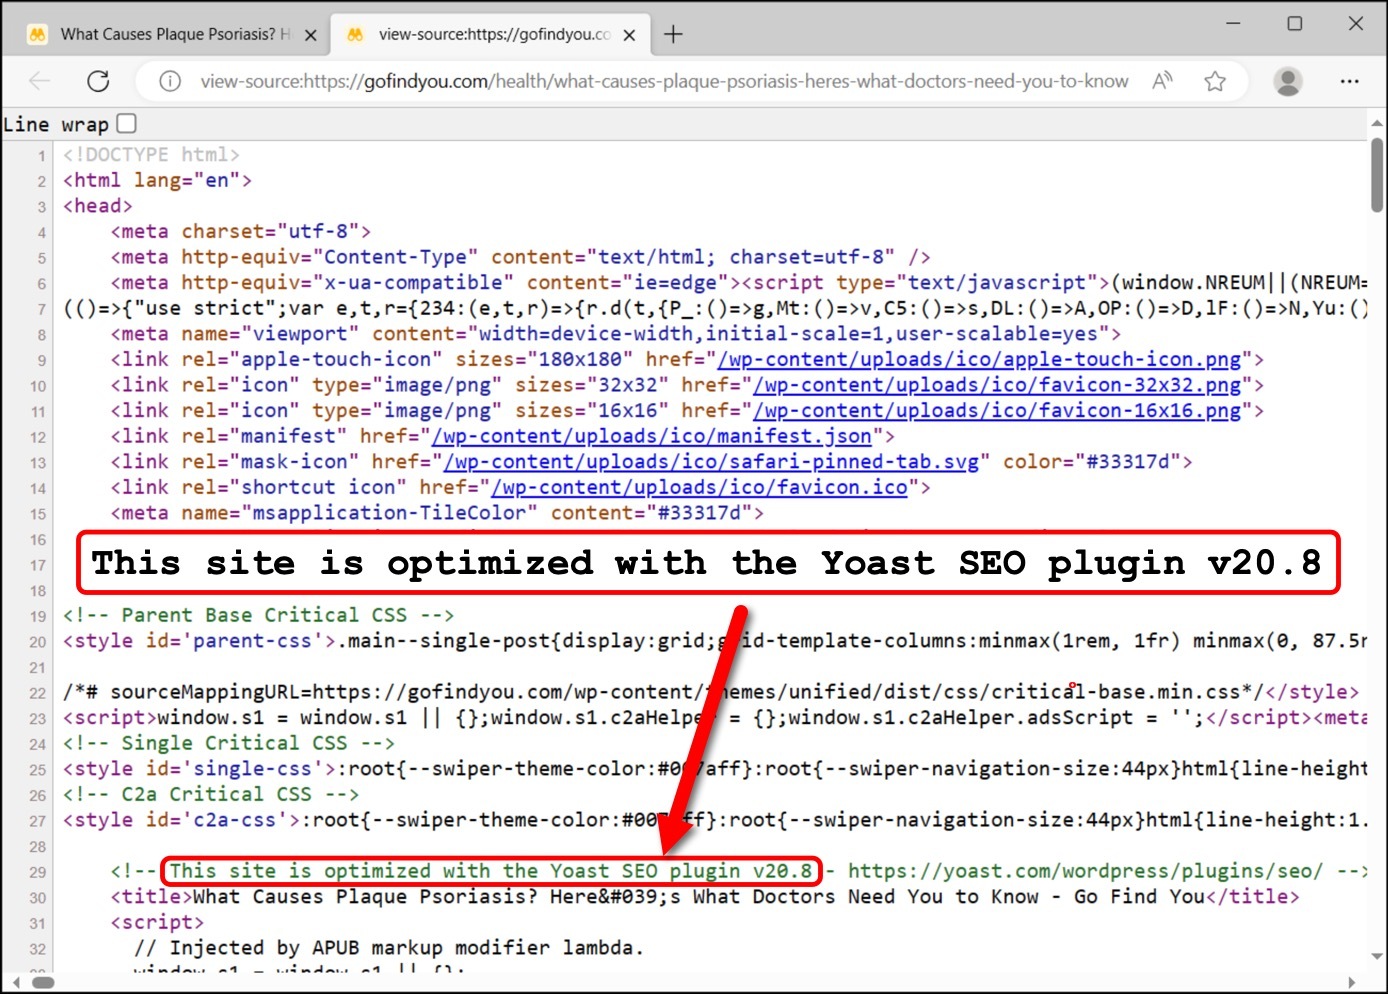 Image 4 is a screenshot of the source code for one of the clickbait pages. It uses the Yoast SEO plugin. This site is optimized with the Yoast SEO plugin v20.8